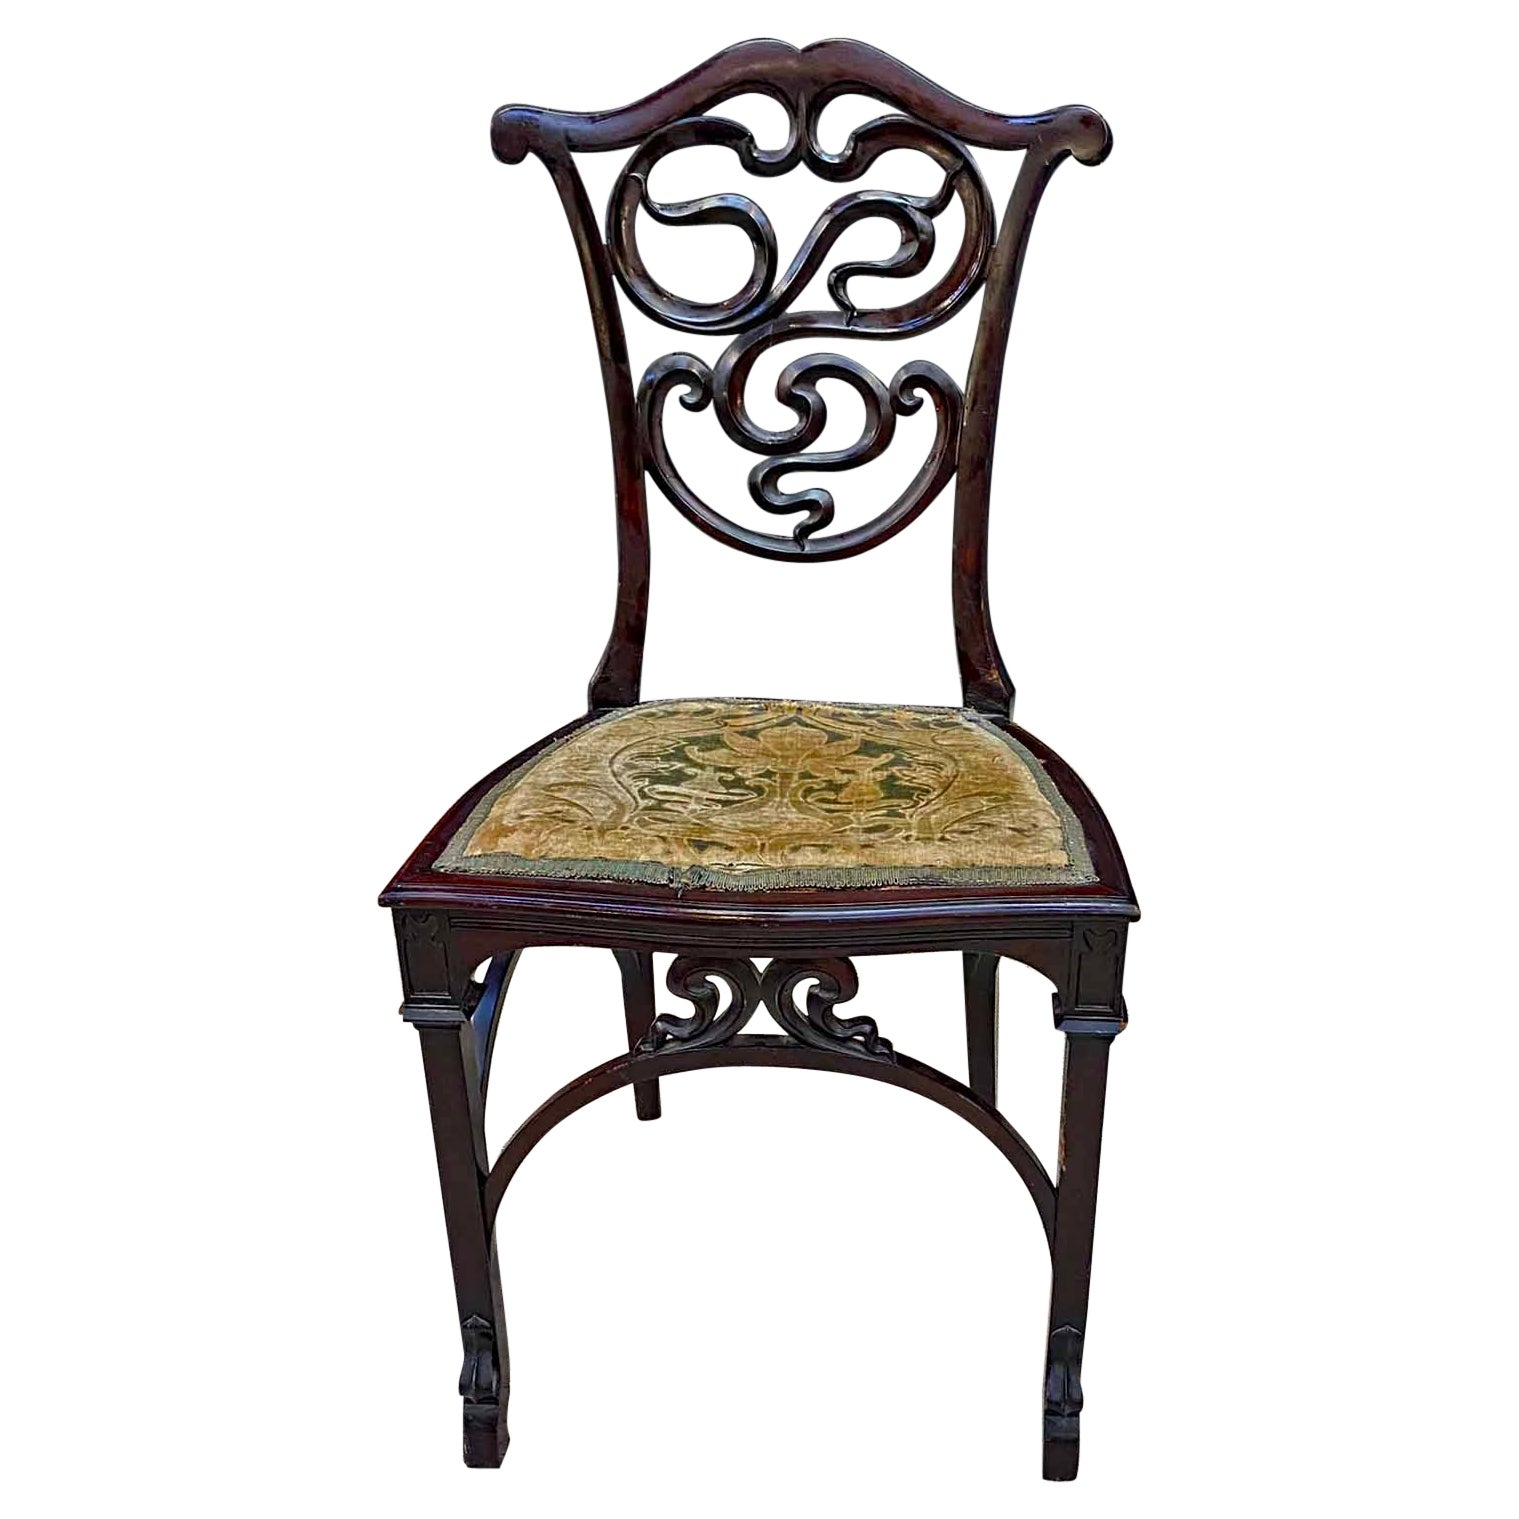 Art Nouveau period chair with Chinese pattern circa 1880,  For Sale